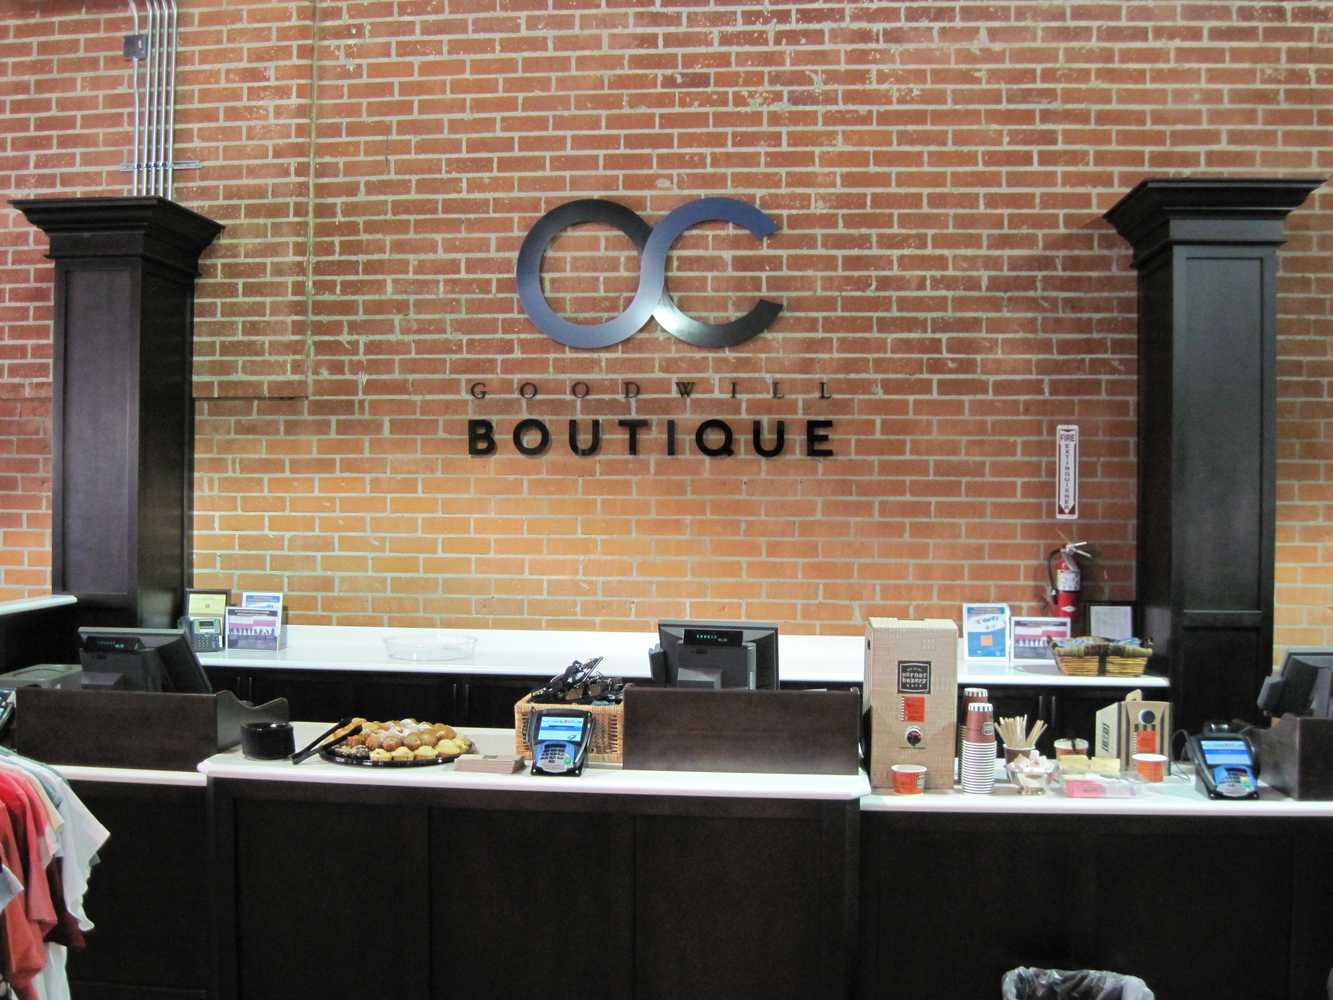 O.C. Boutique (Goodwill of O.C.)